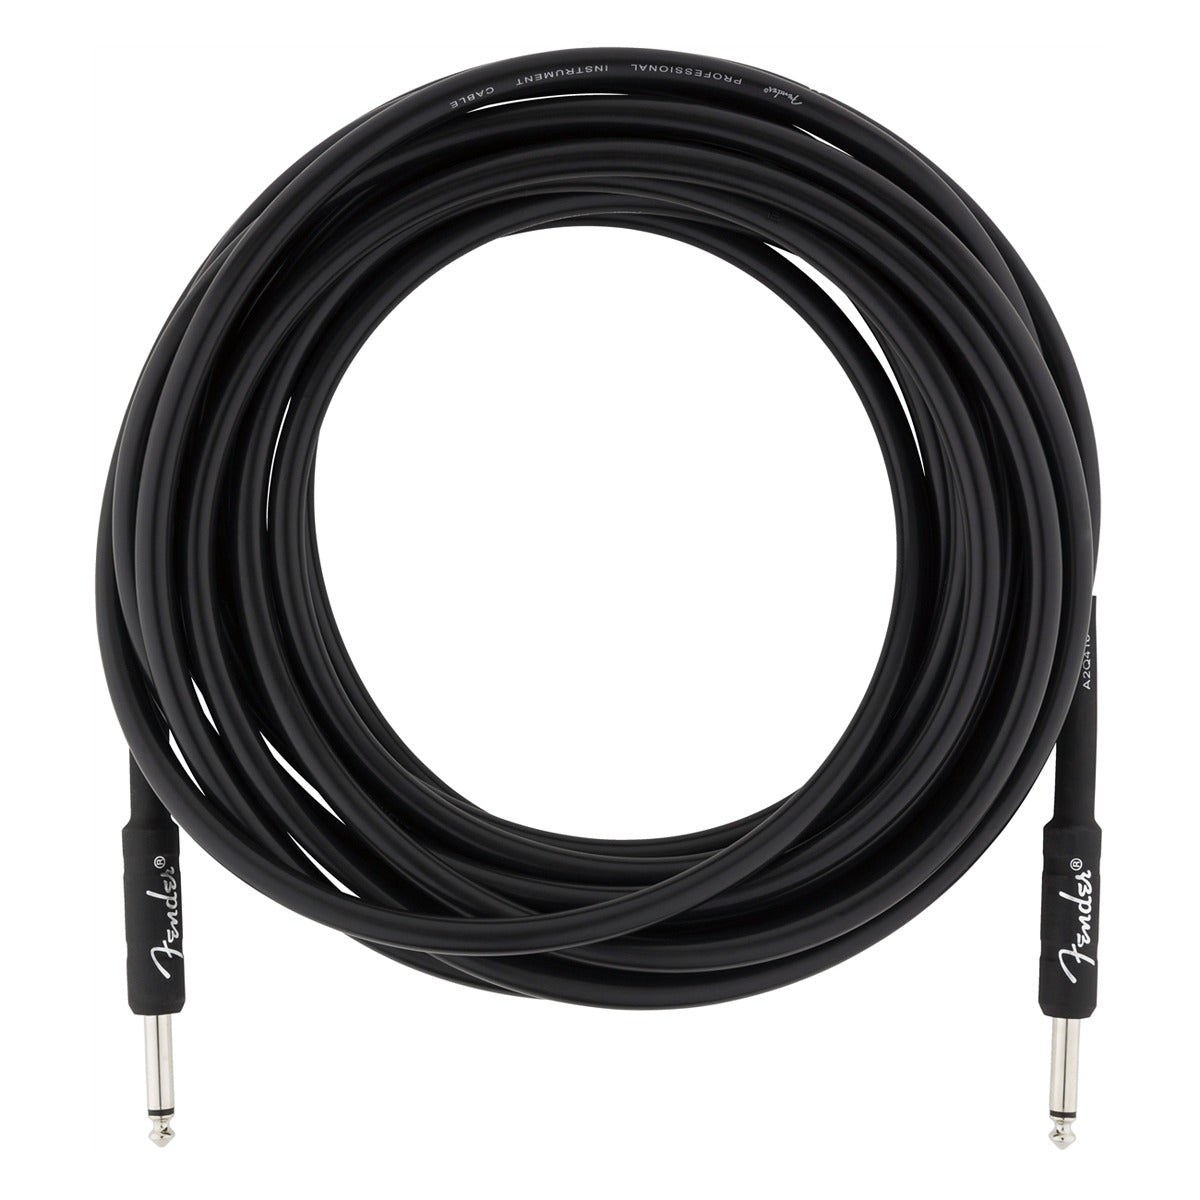 Fender Professional Series Instrument Cable - 25'